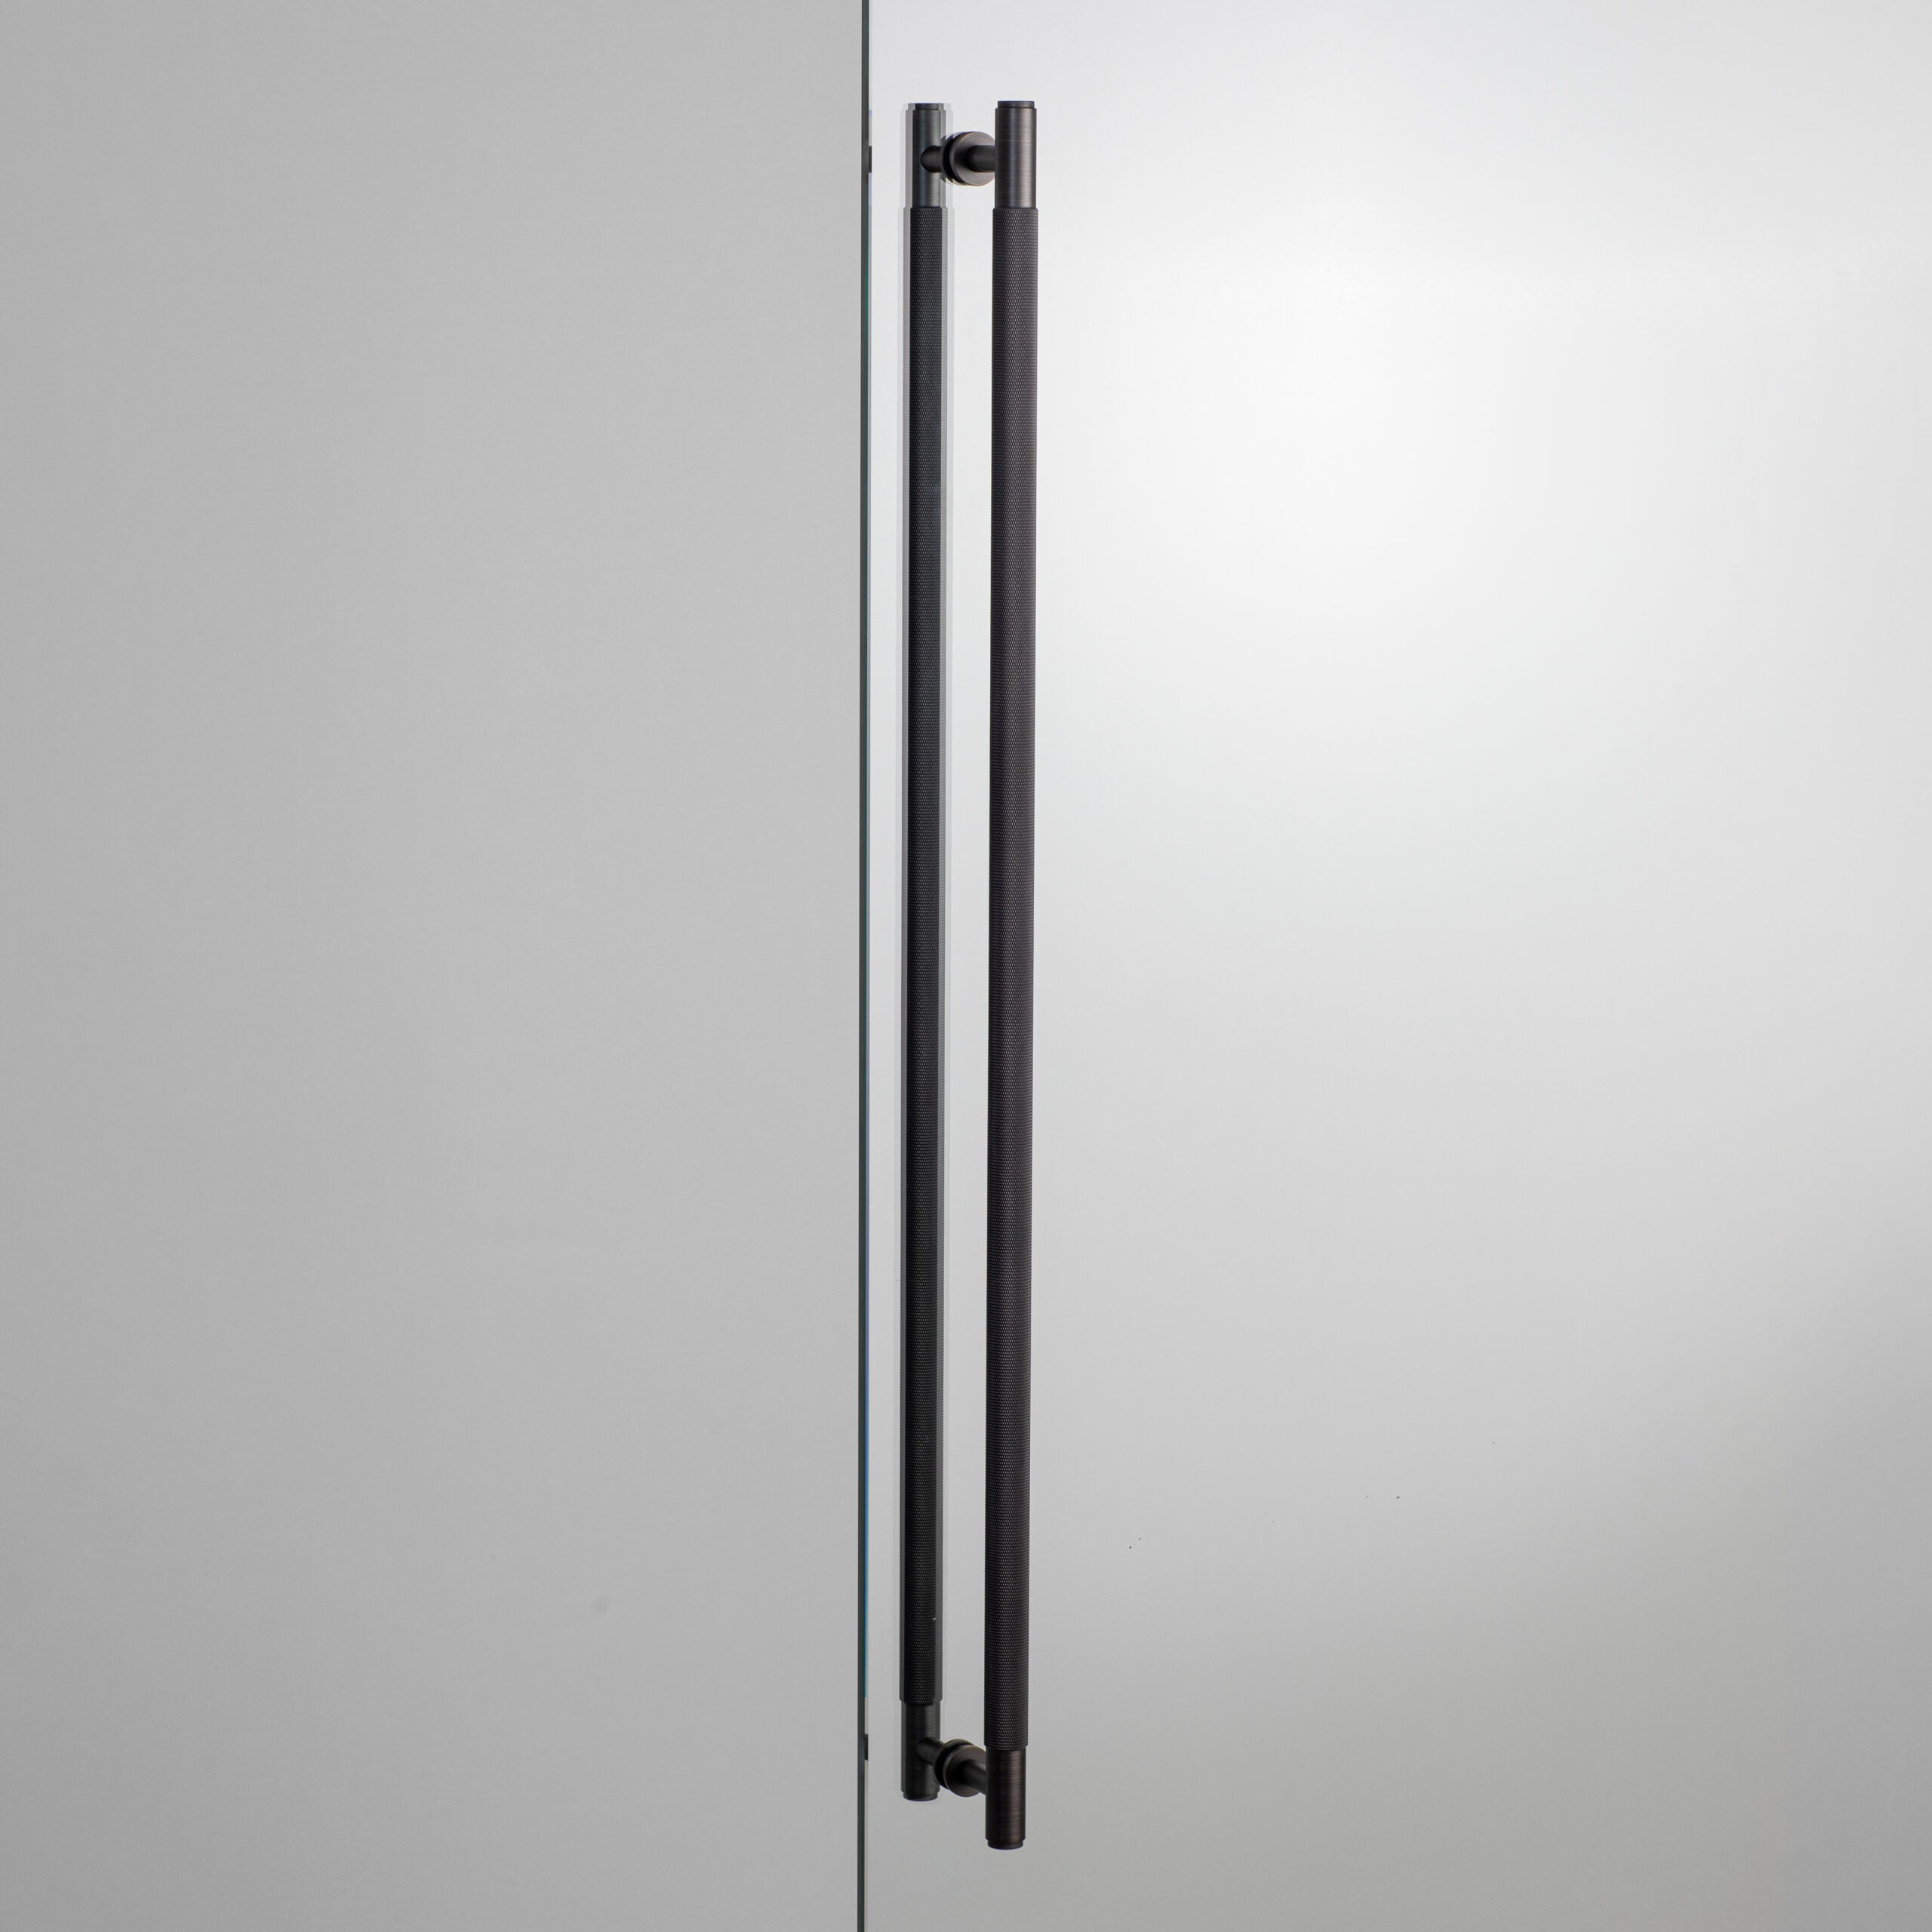 Buster + Punch 30.5 inch Double-sided Cross Knurl Closet Bar Hardware Buster + Punch Smoked Bronze  